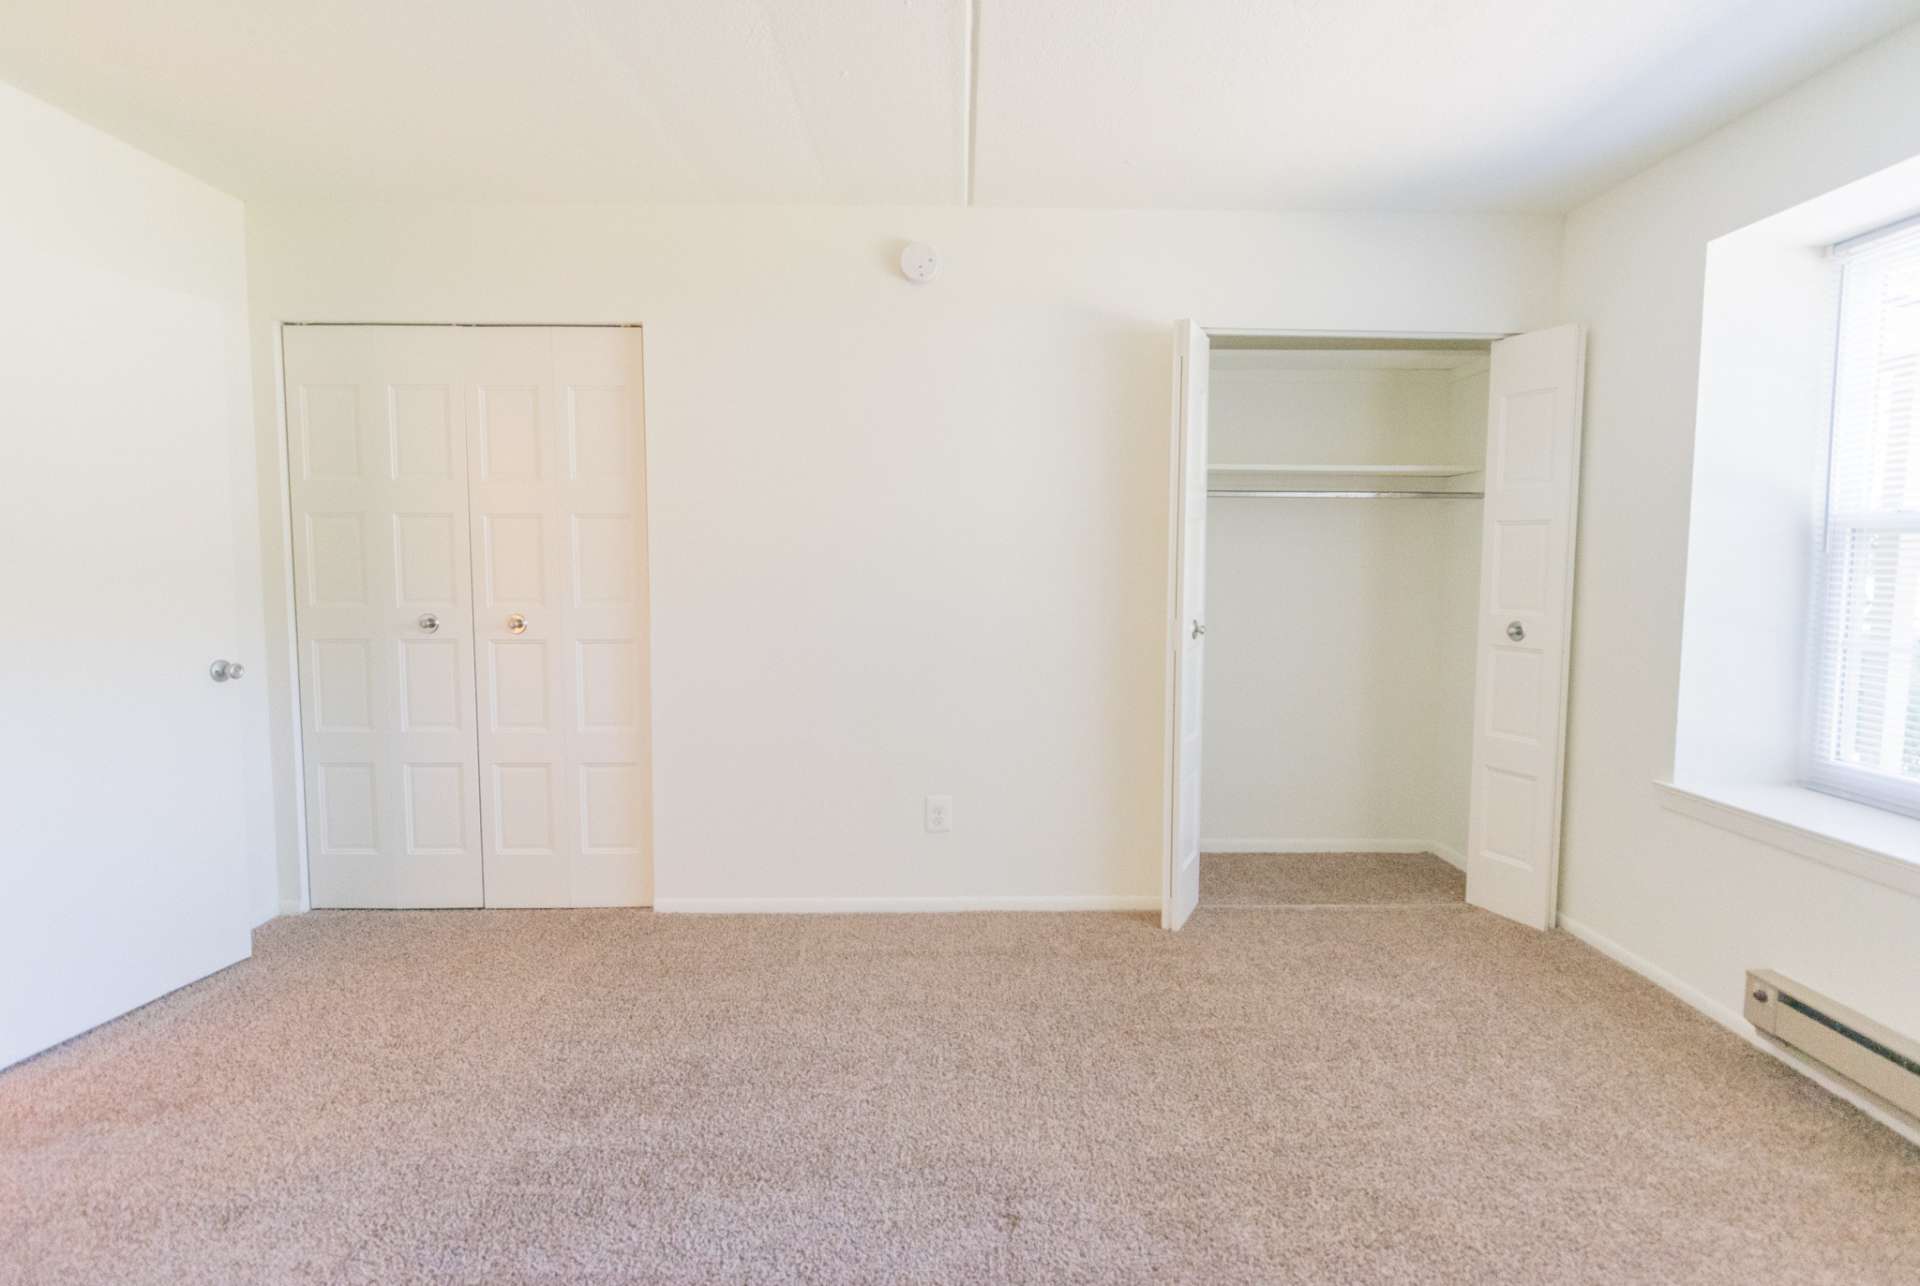 Willow Run Apartments carpeted area with two closets